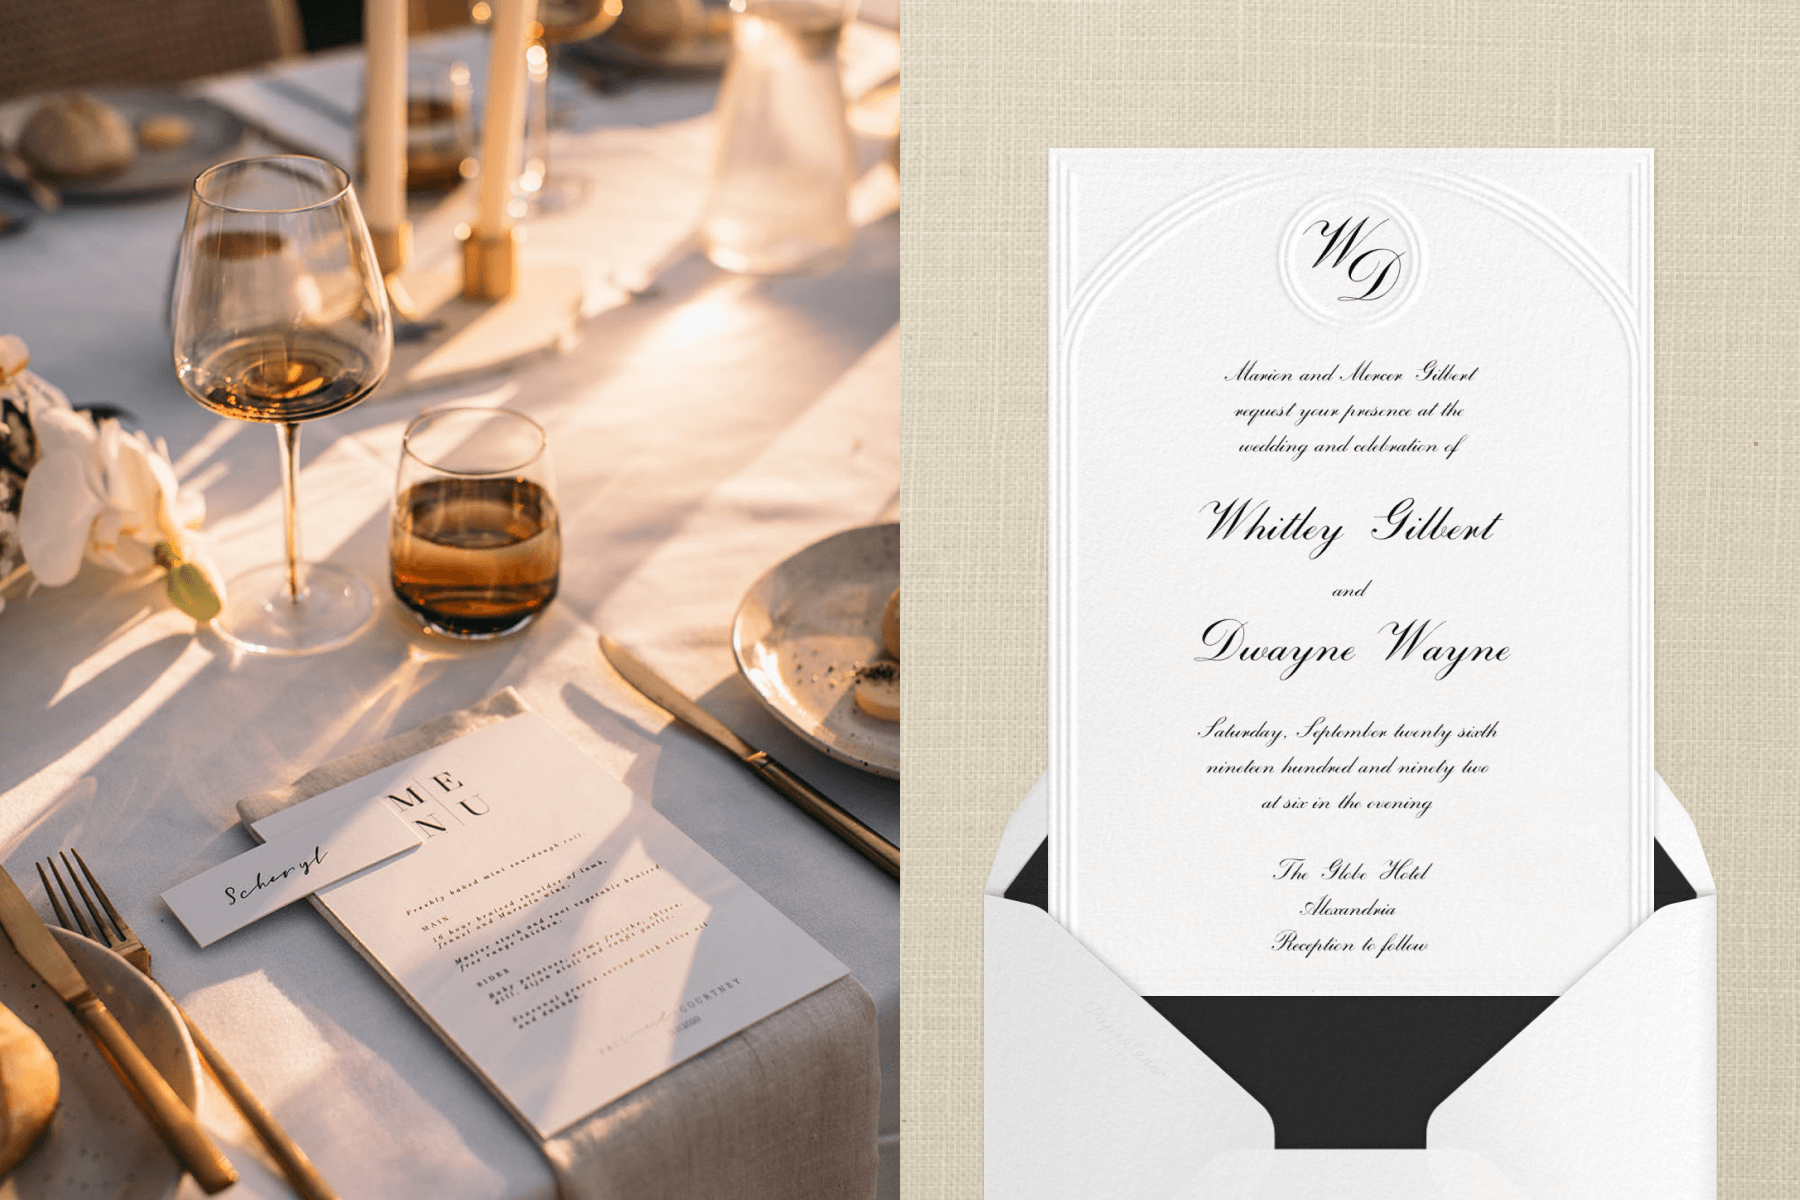 Left: A classy, minimalist table setting with a formal menu and place card; Right: A blind-embossed wedding invitation with a monogram.